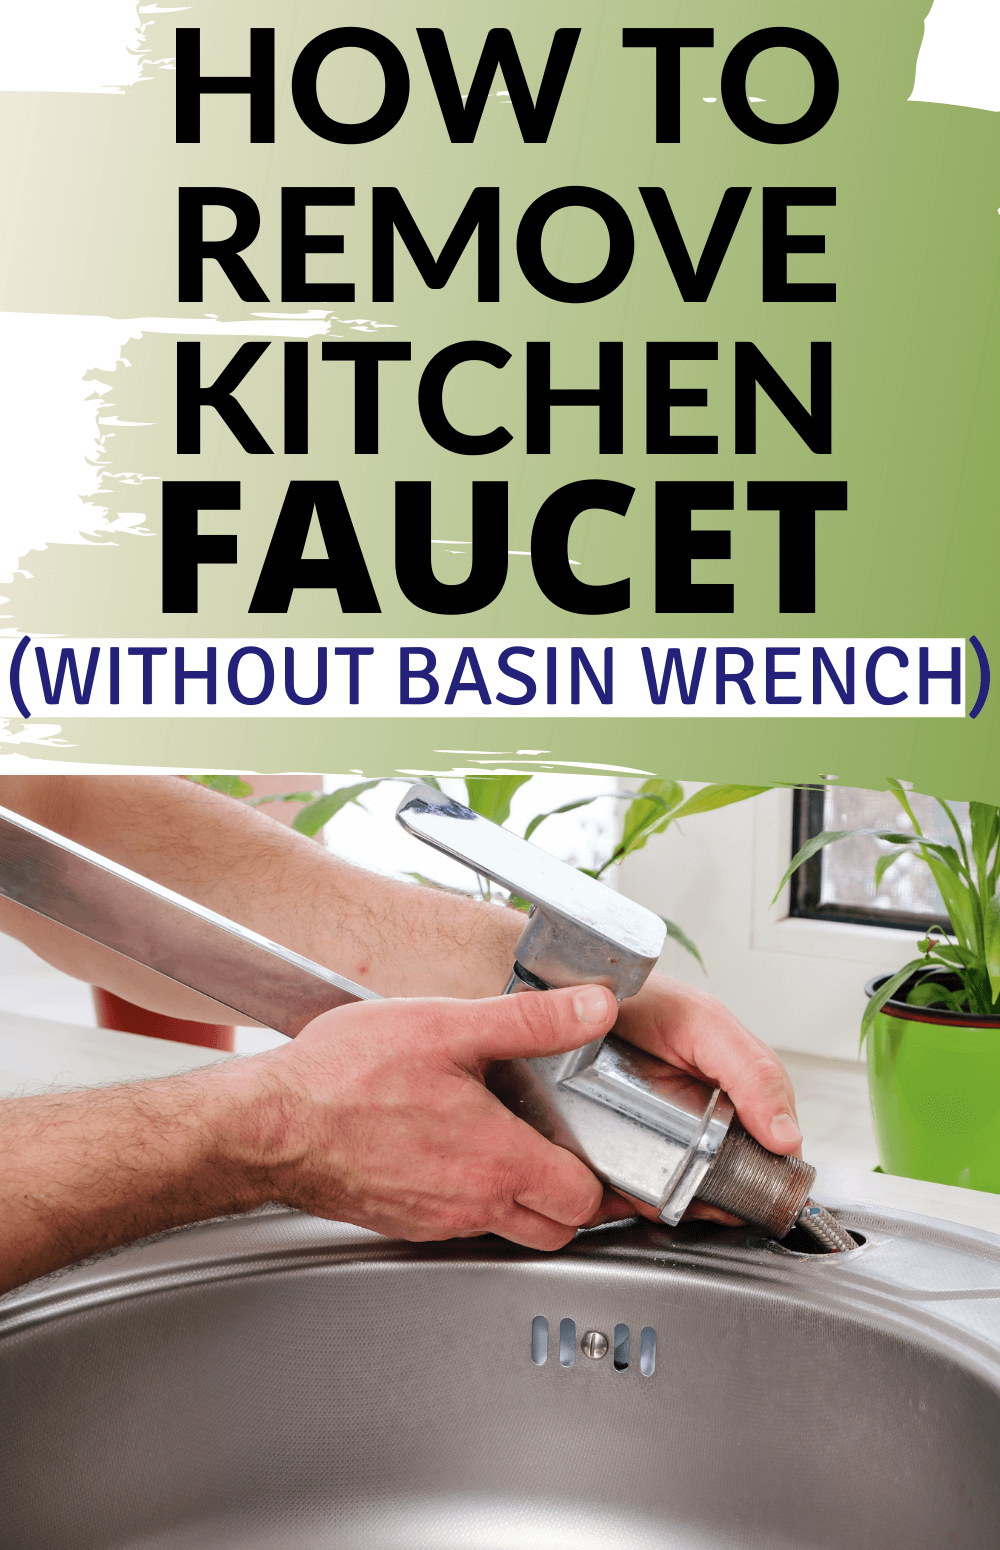 how to remove kitchen faucet without basin wrench